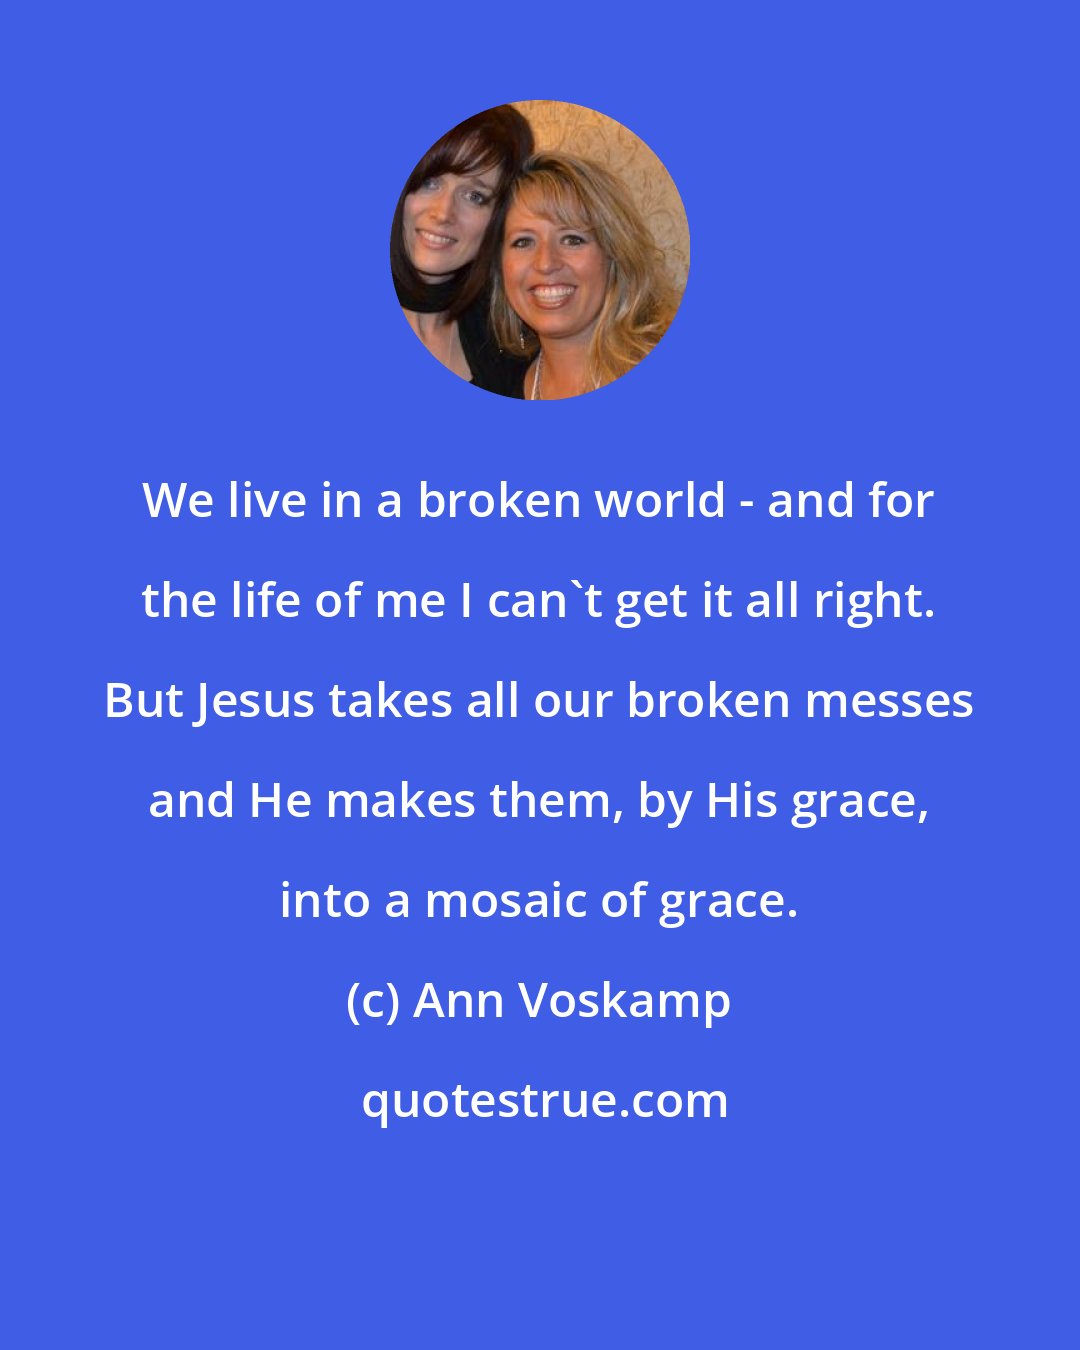 Ann Voskamp: We live in a broken world - and for the life of me I can't get it all right. But Jesus takes all our broken messes and He makes them, by His grace, into a mosaic of grace.